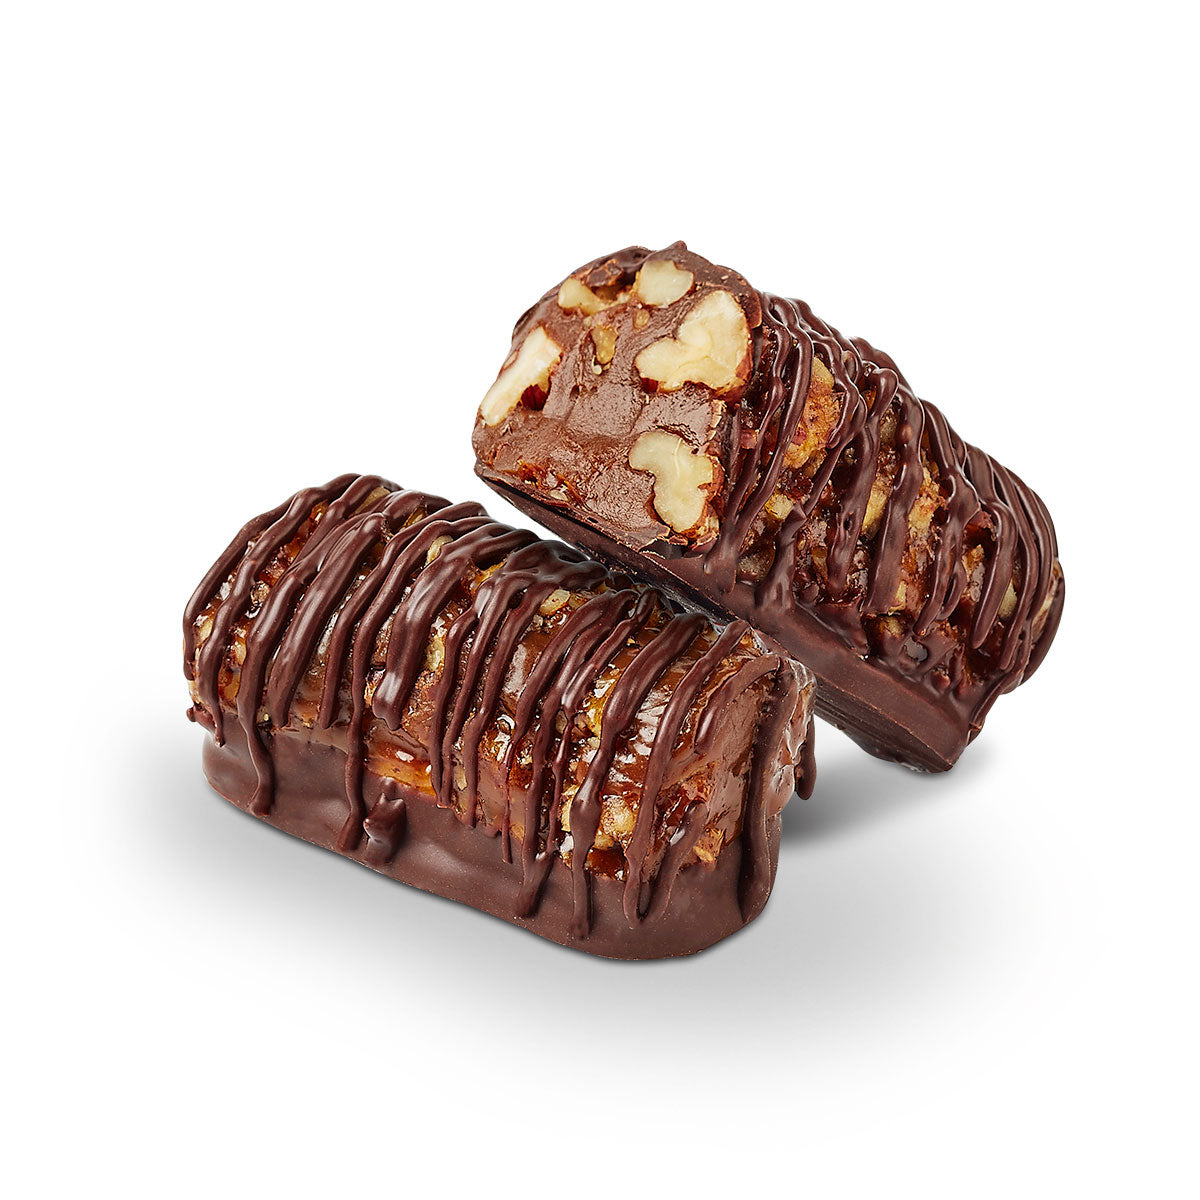 Peccanroll's Gourmet English Toffee Rolls - Pecan-Encrusted, Chocolate-Smothered Delight | 45% Pure Cacao and Gluten Free